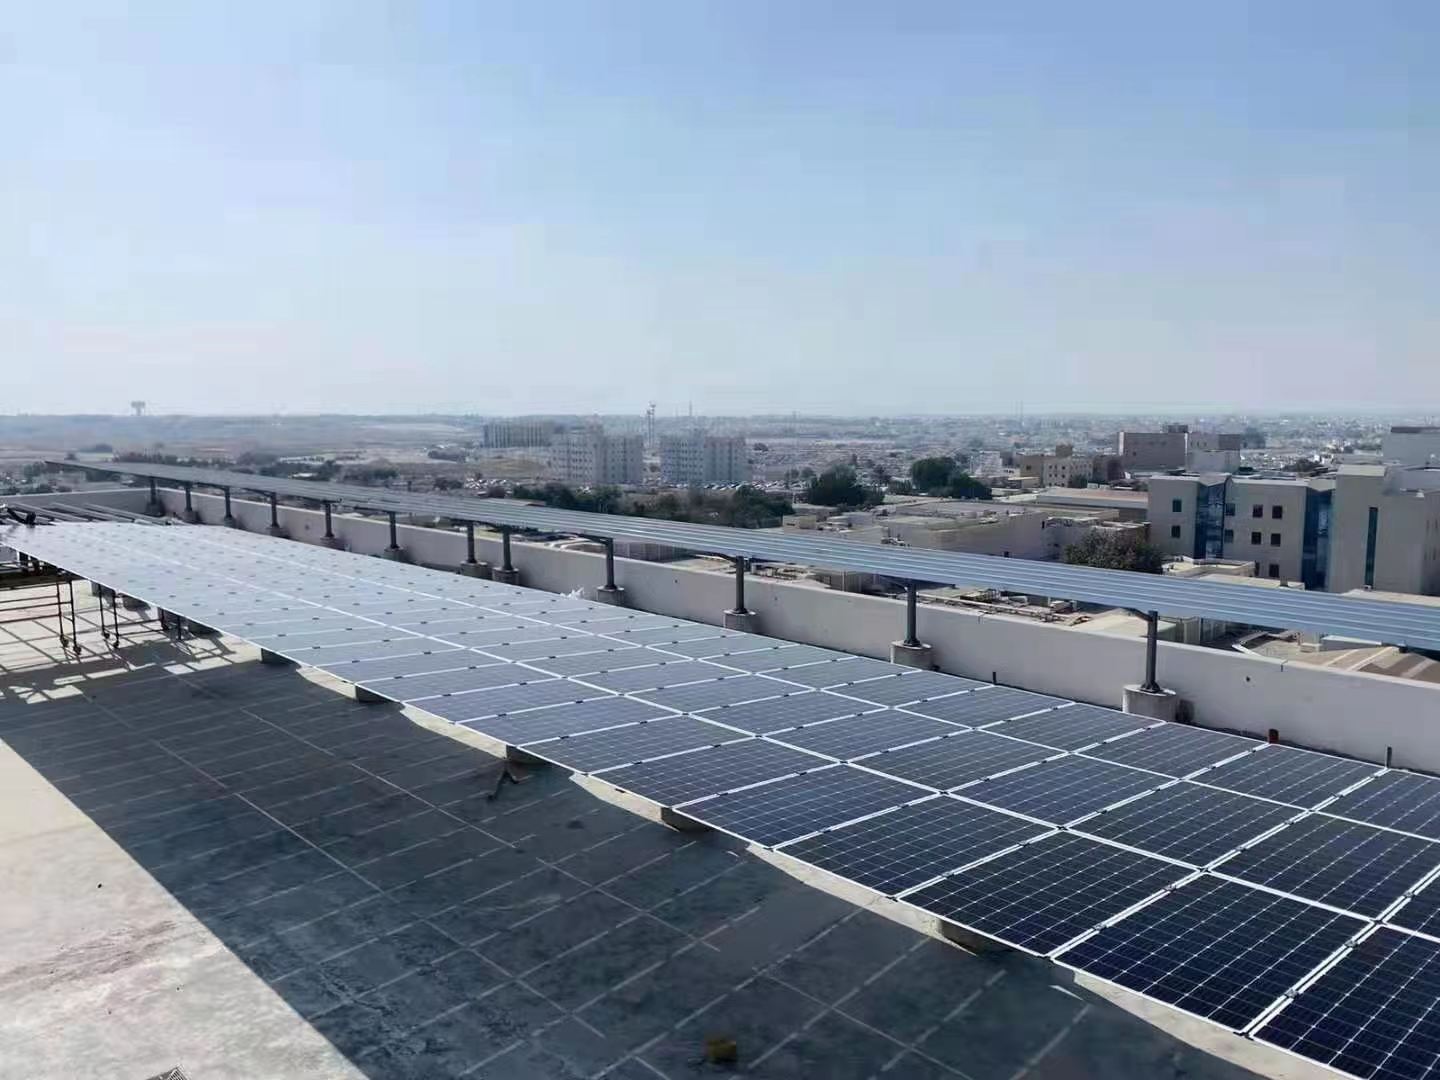 200kW photovoltaic shed in Bahrain